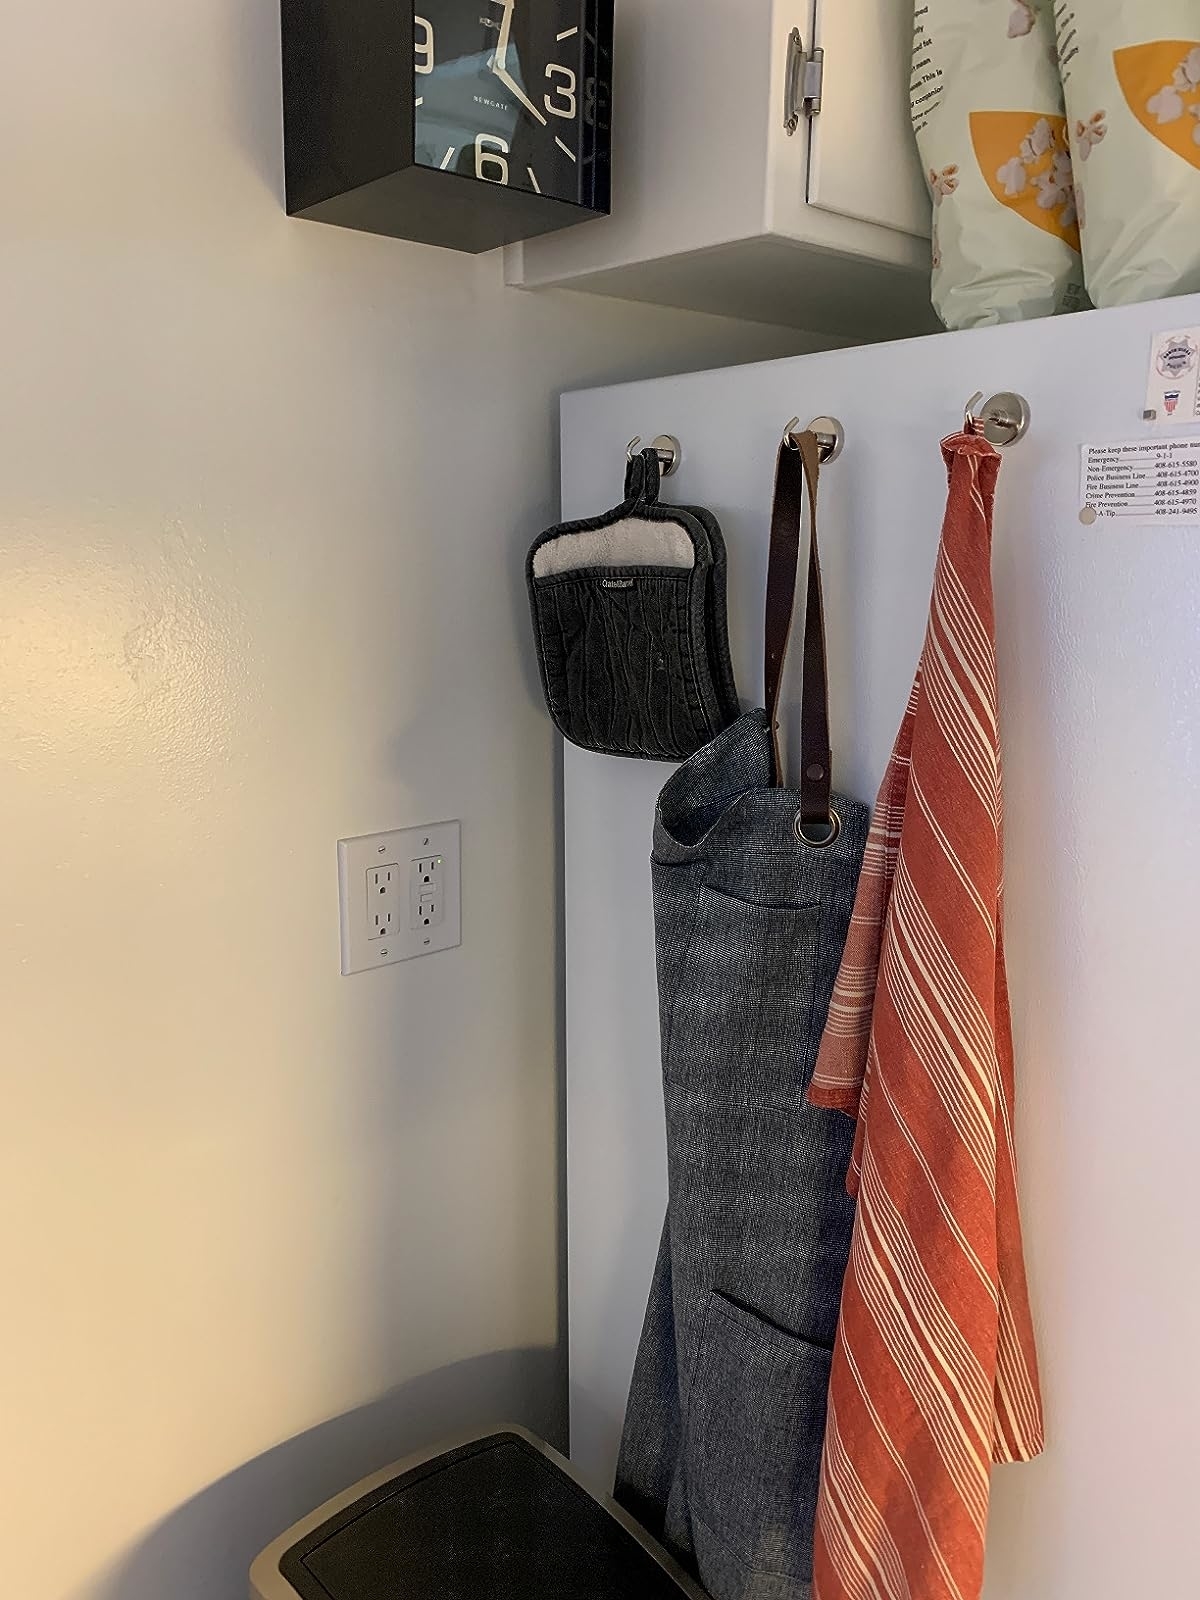 Reviewer image of hooks on their fridge holding aprons and pot holders